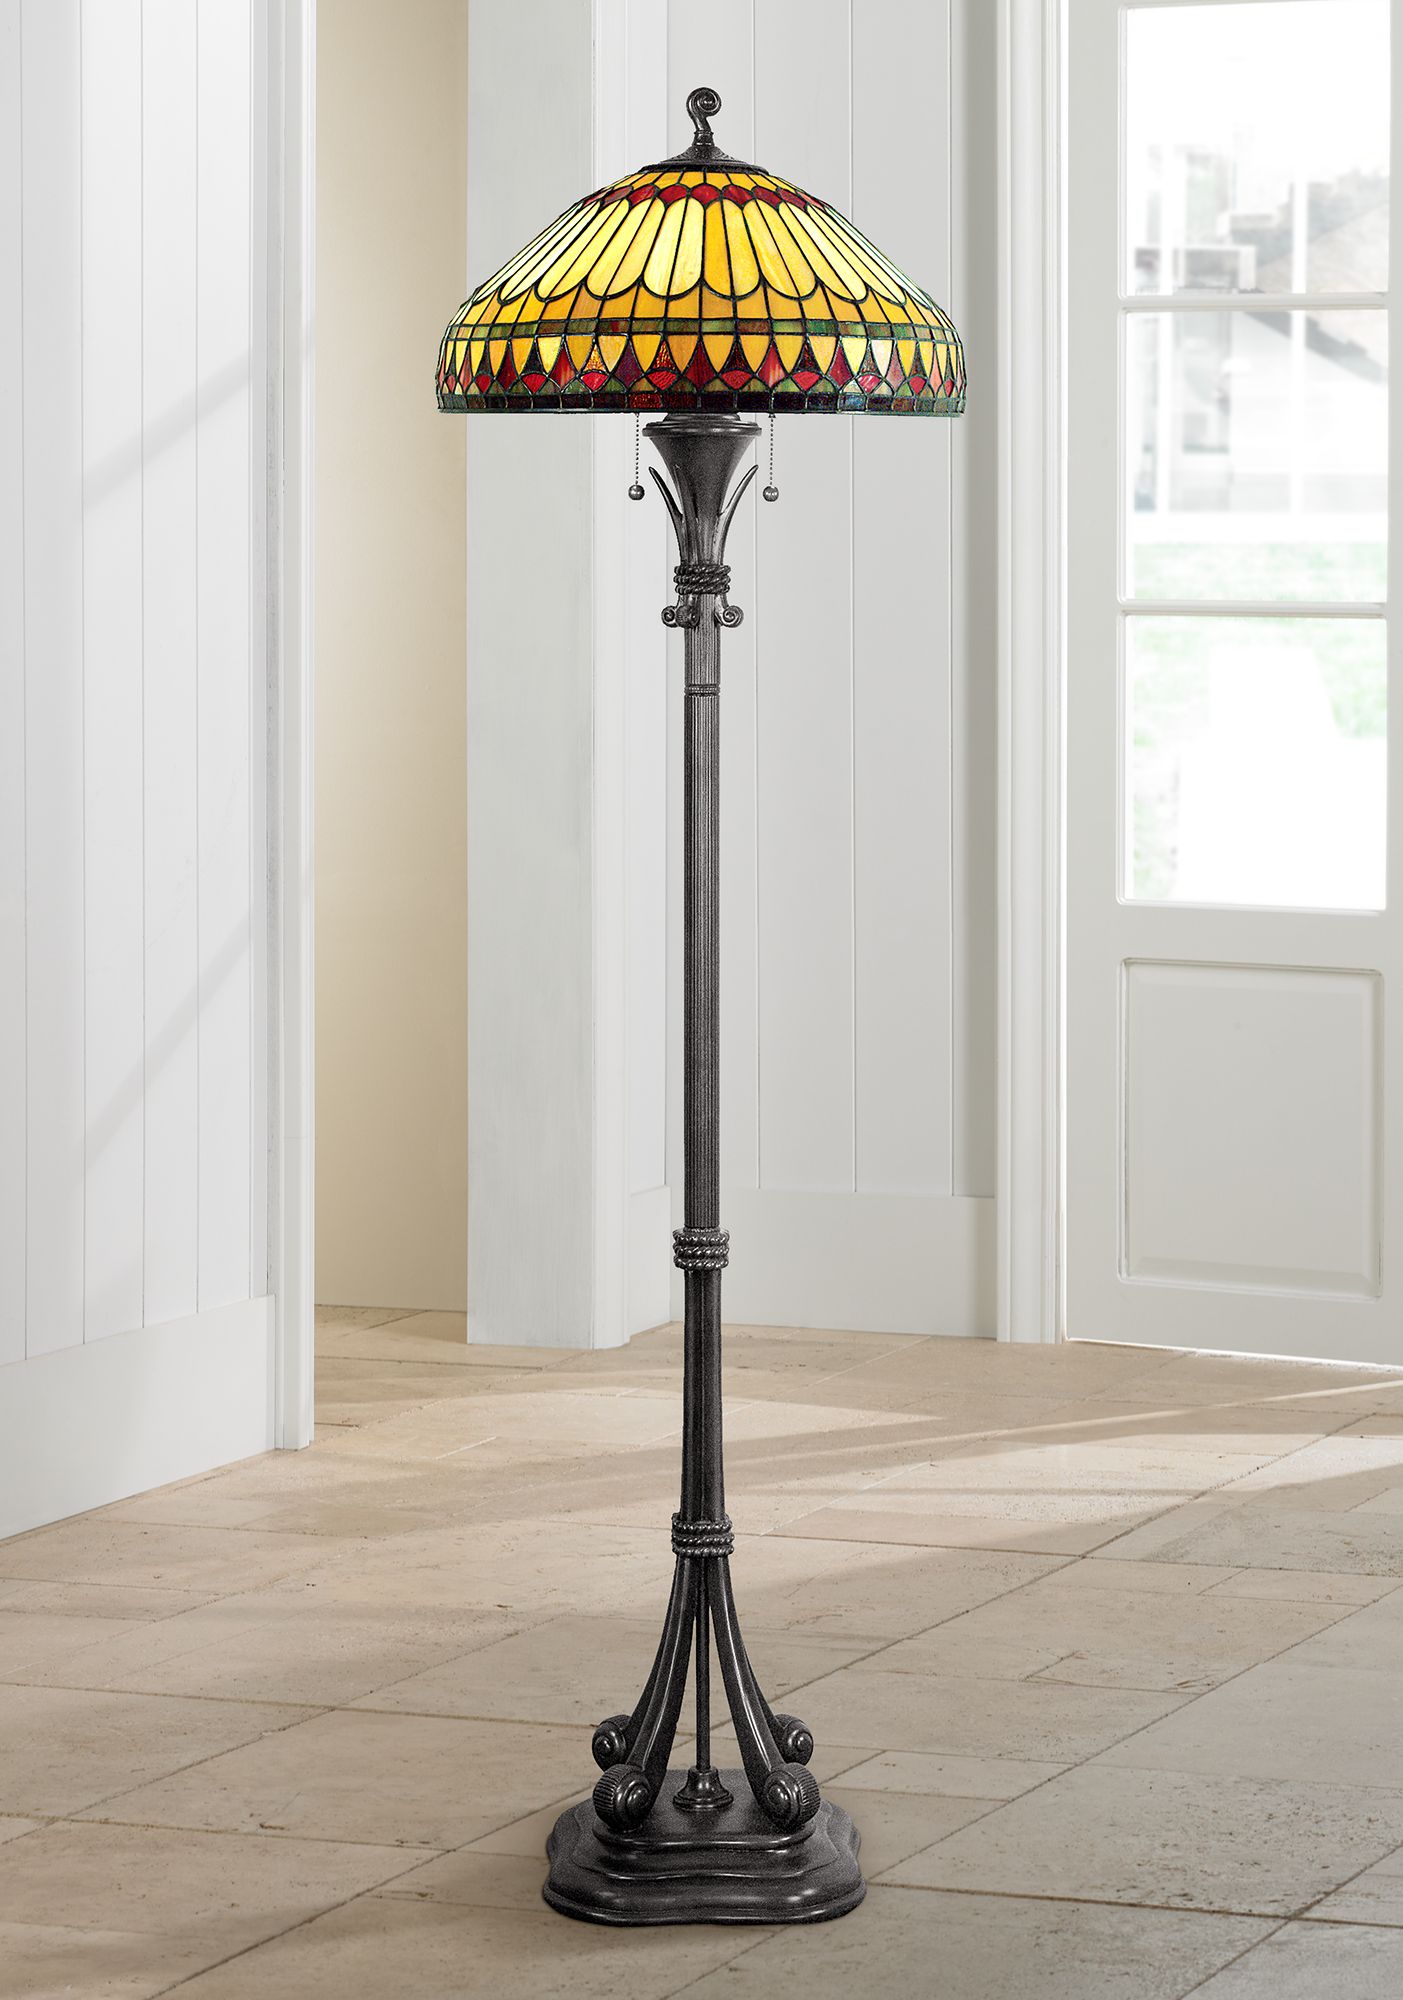 Quoizel Tiffany-Style Floor Lamp with 